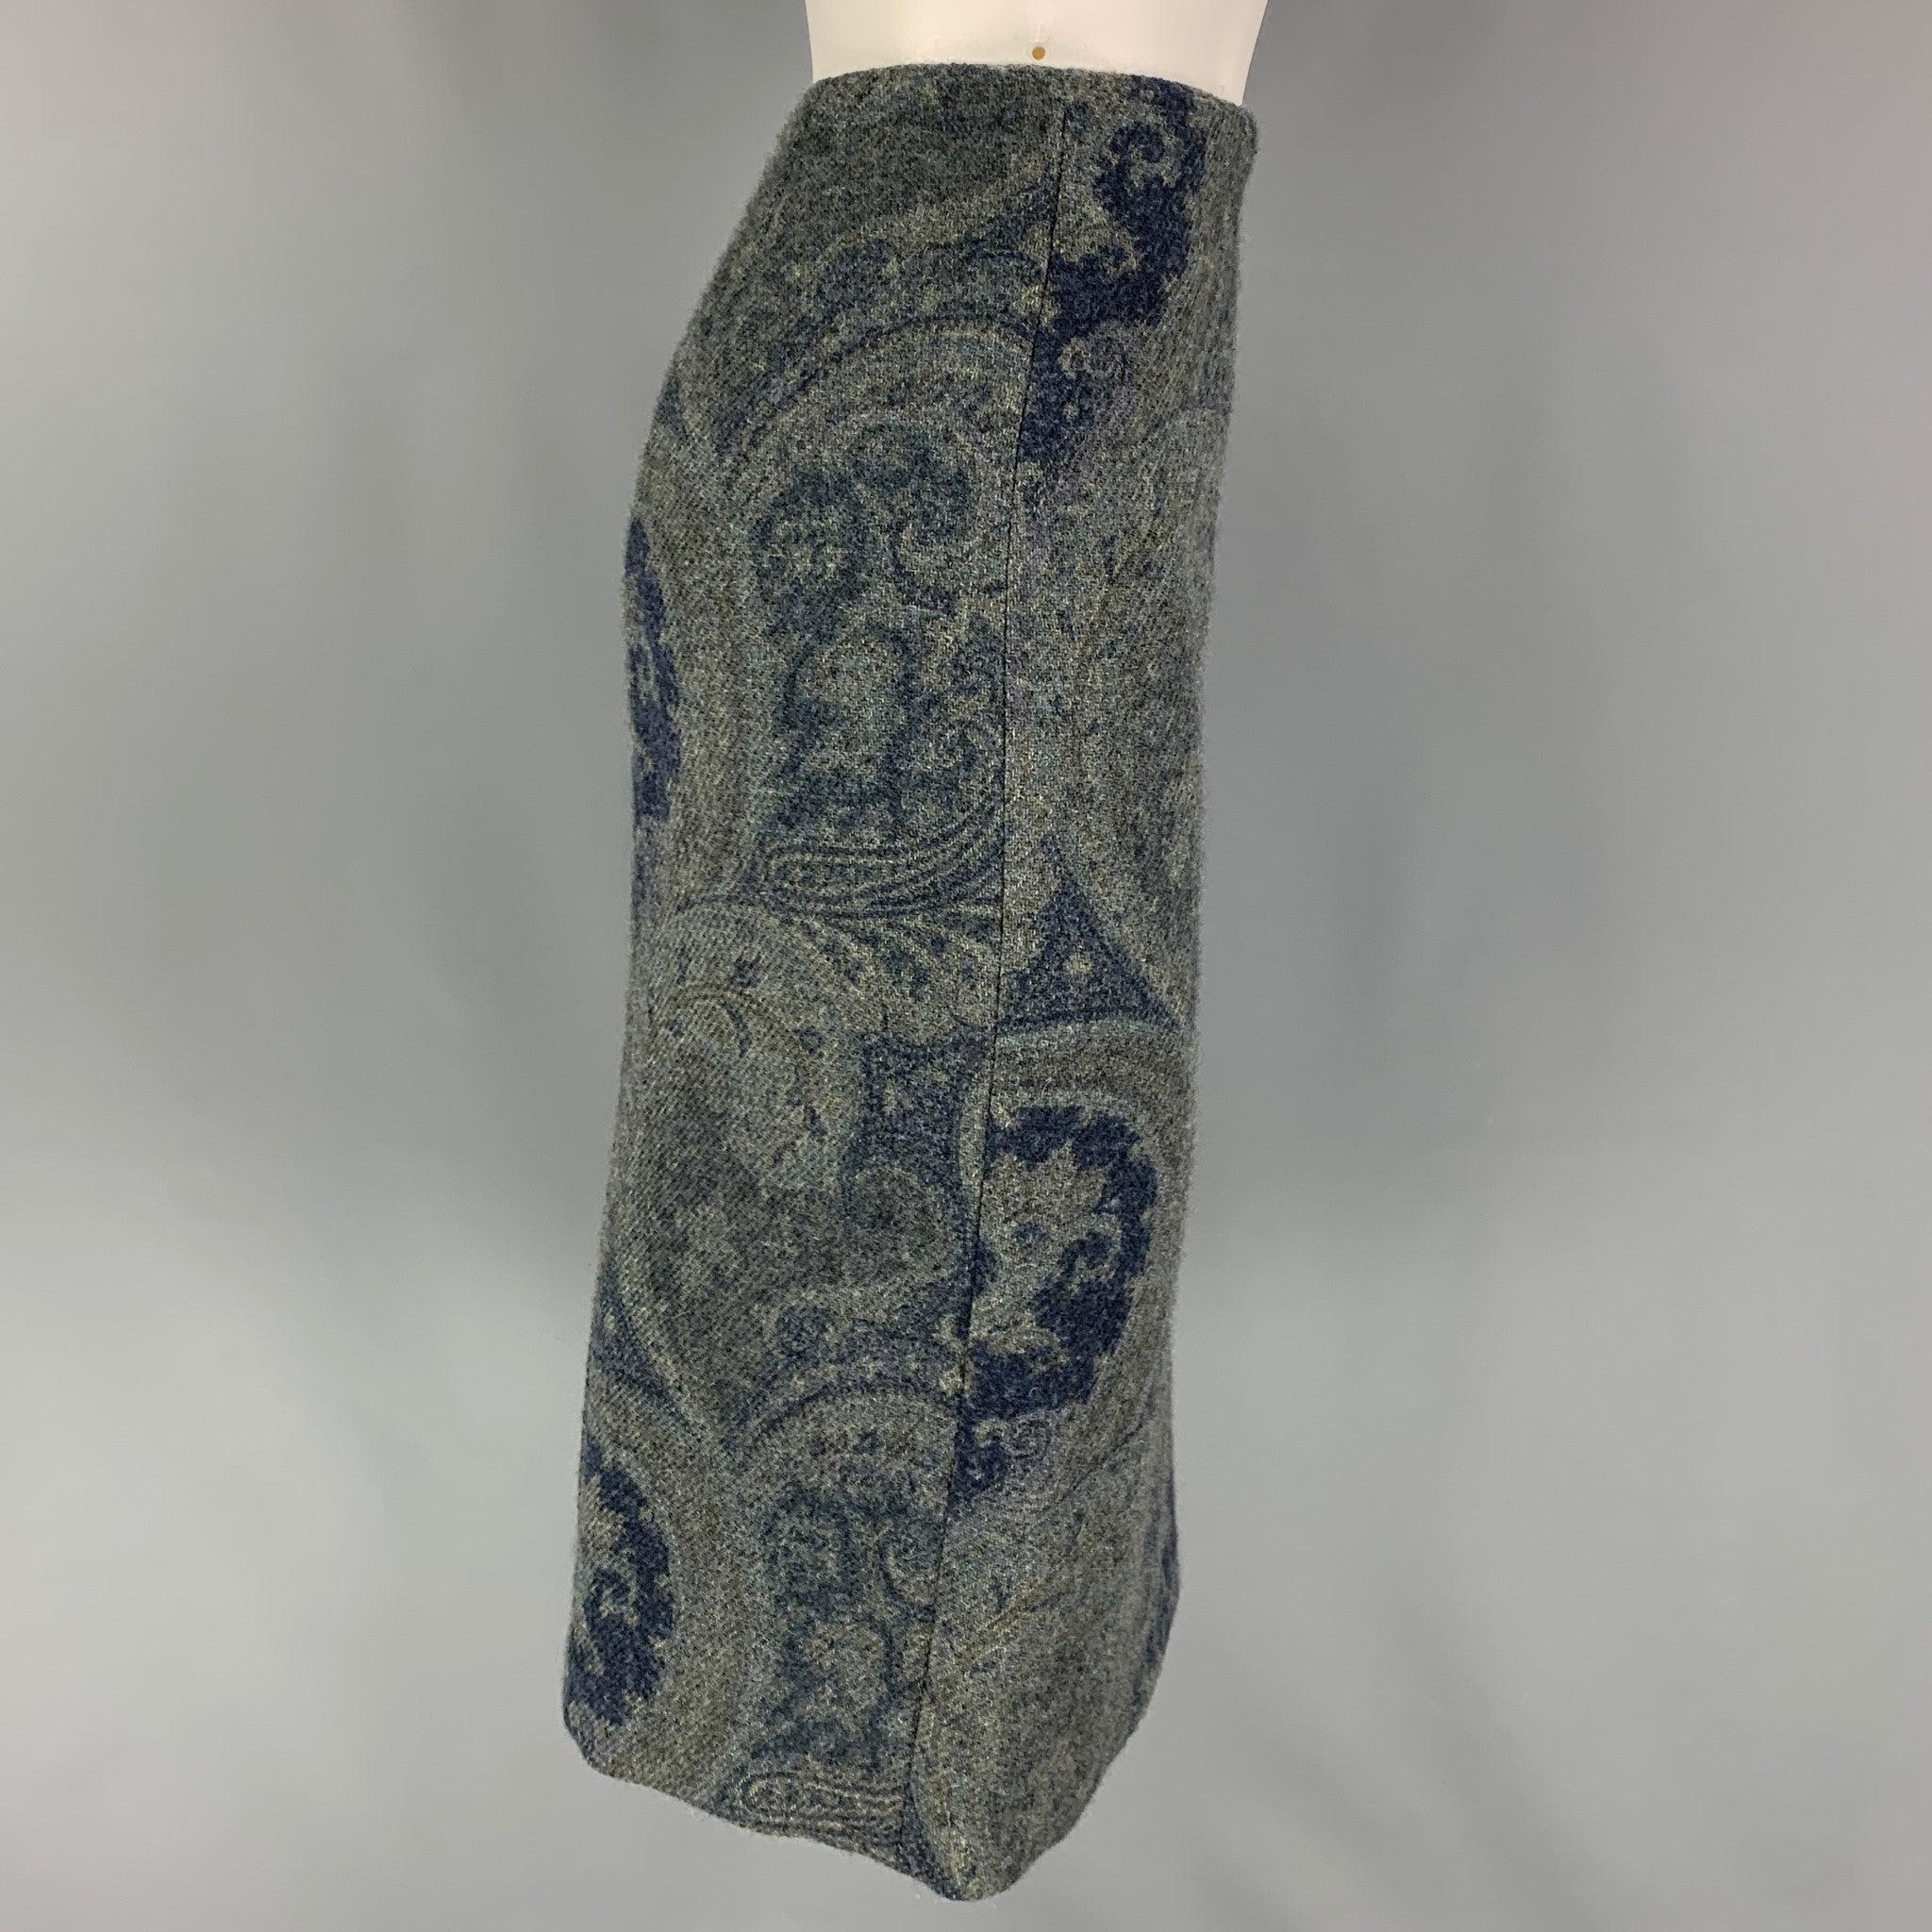 RALPH LAUREN 'Black Label' skirt comes in a grey & blue paisley wool with a slip liner featuring a pencil style, back slit, and aside zipper closure. Made in USA. Very Good
Pre-Owned Condition. 

Marked:   4 

Measurements: 
  Waist: 30 inches  Hip: